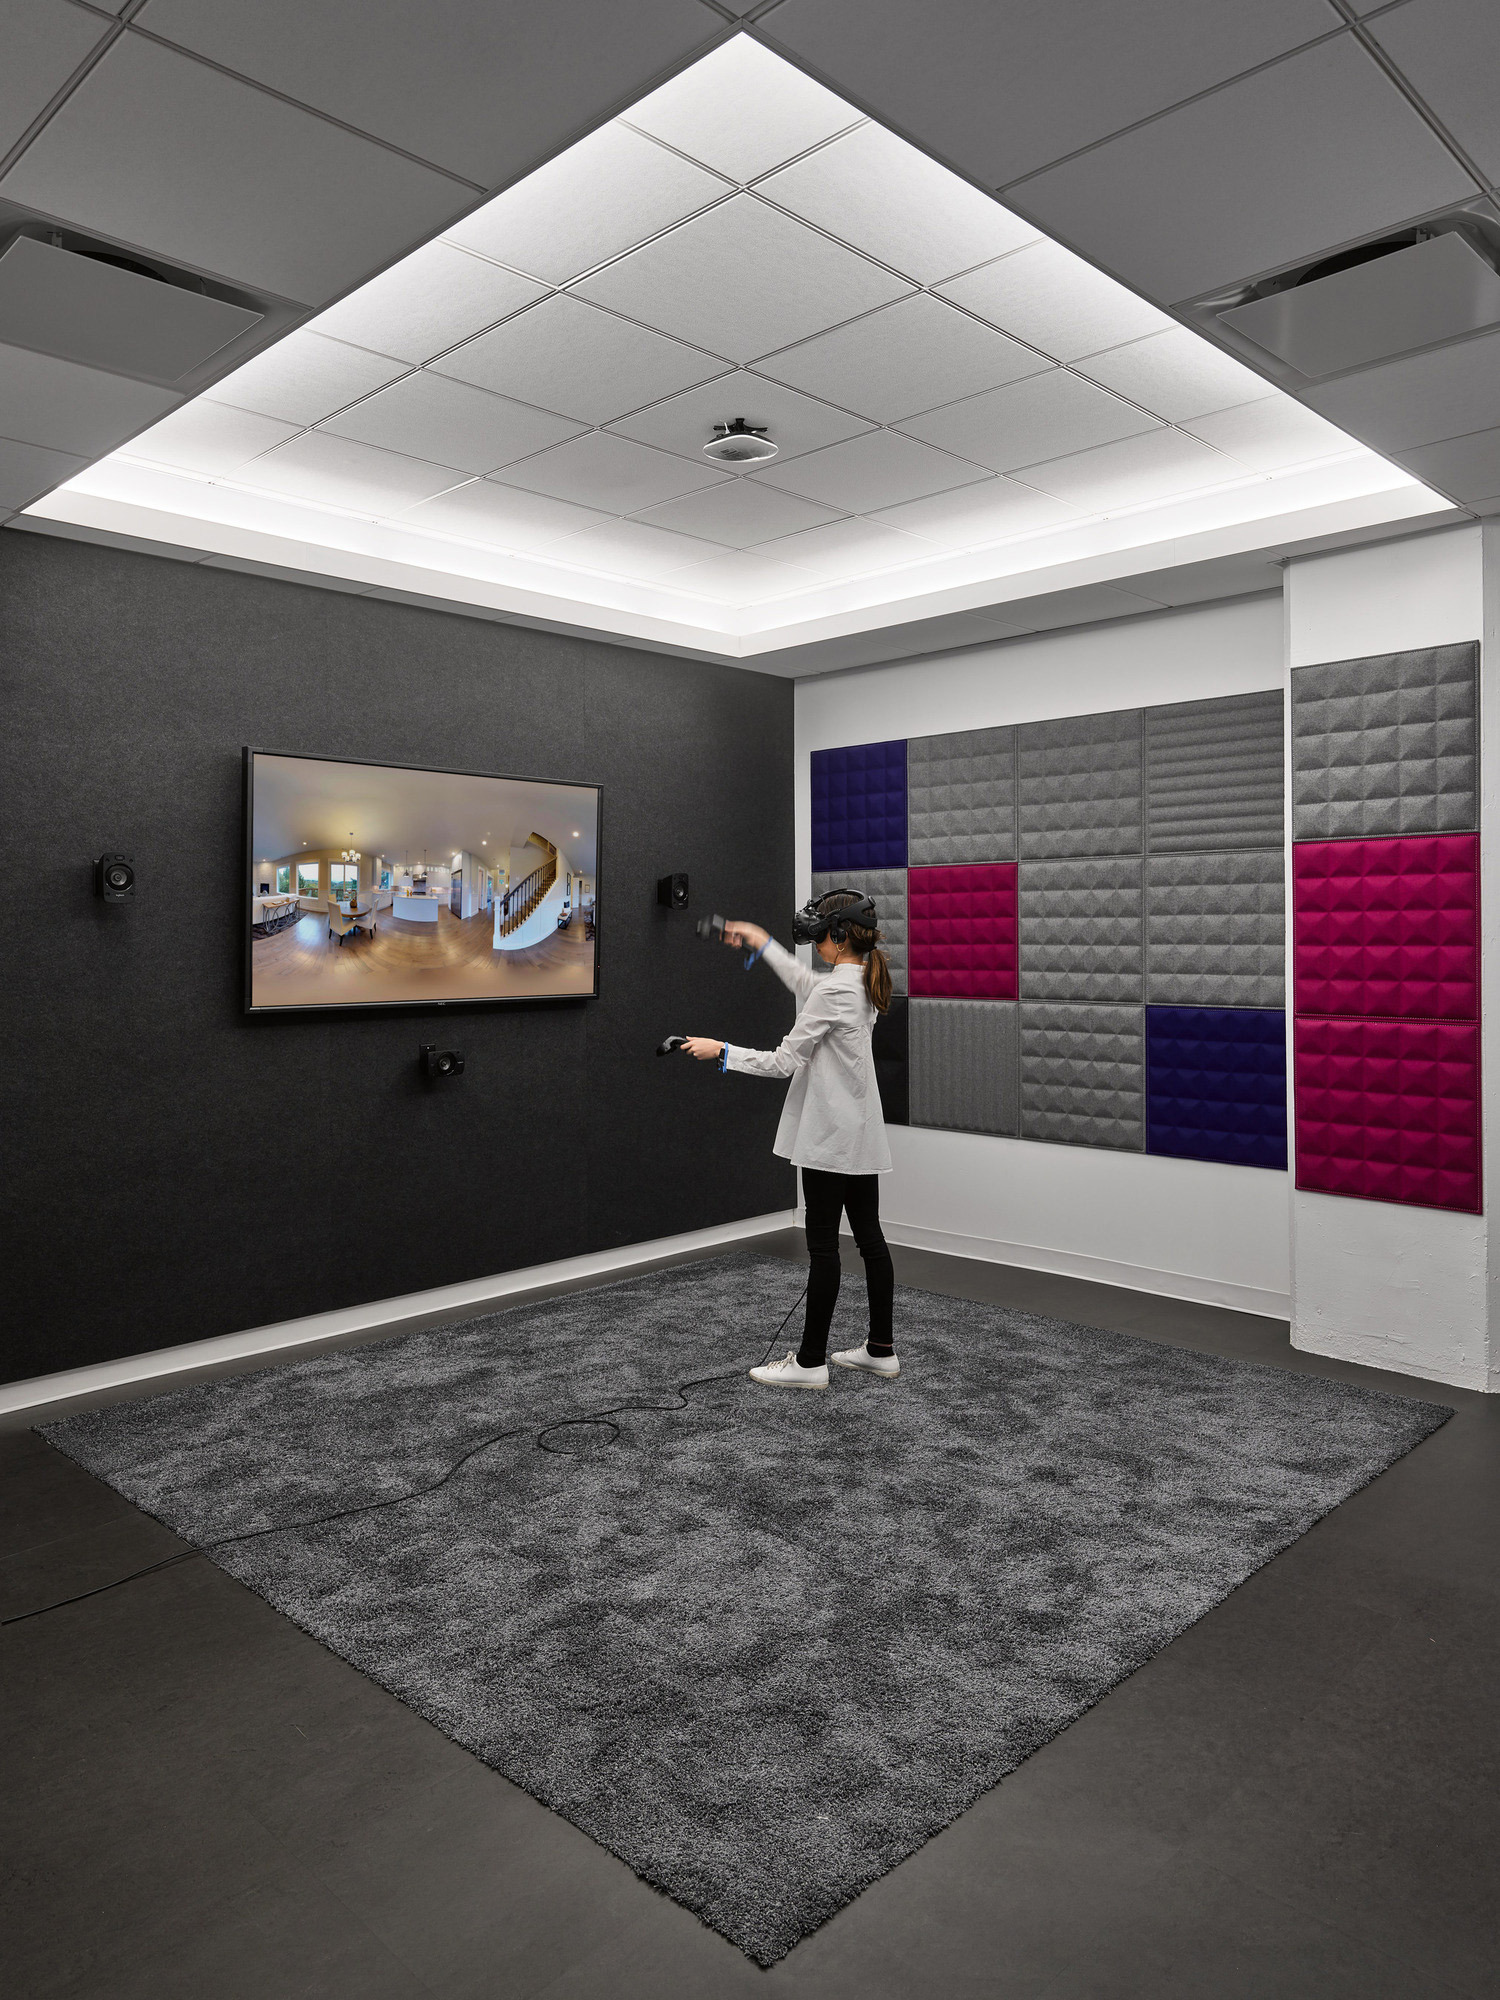 A modern interior features contrasting textured wall panels in grays and vibrant pinks, with a sleek digital display and a person gesturing towards the exhibit. The space is accentuated by a dynamic geometric ceiling design and a plush charcoal carpet, merging functionality with aesthetic appeal.